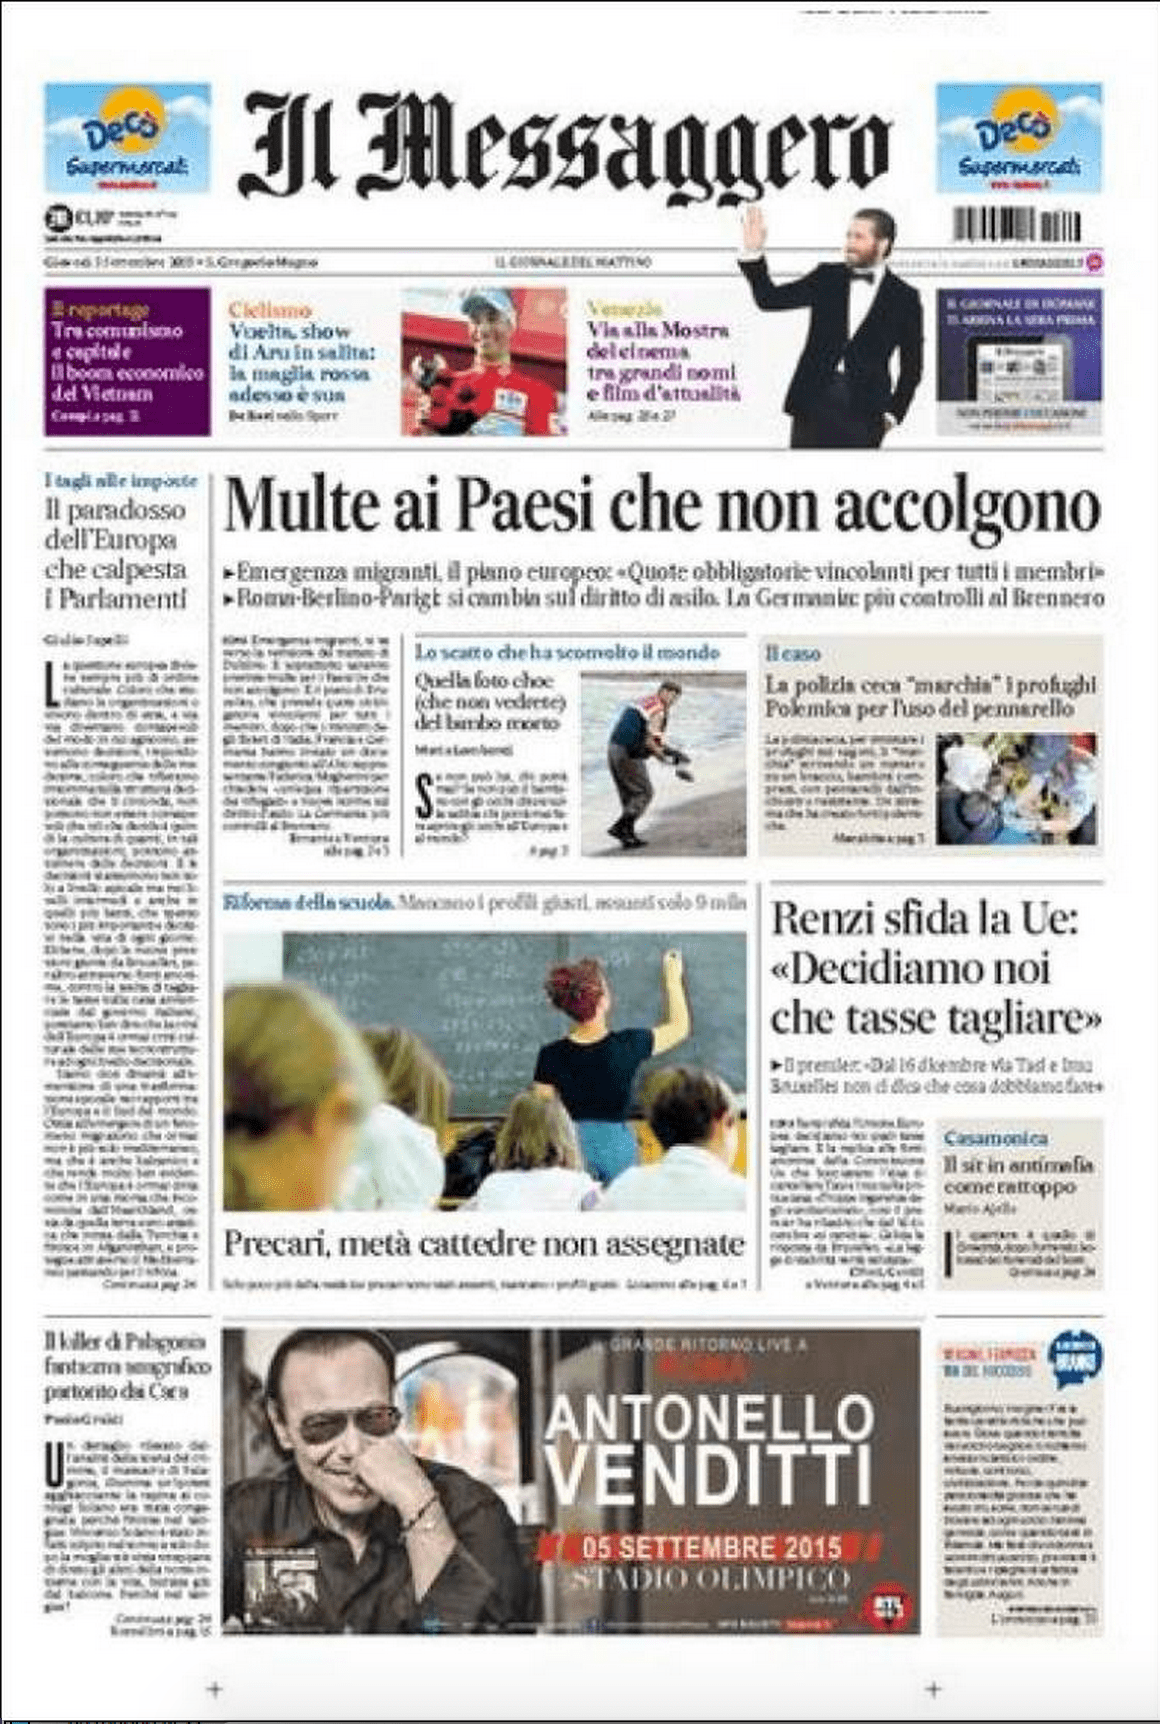 Drowned Migrant Boy Il Messaggero front page